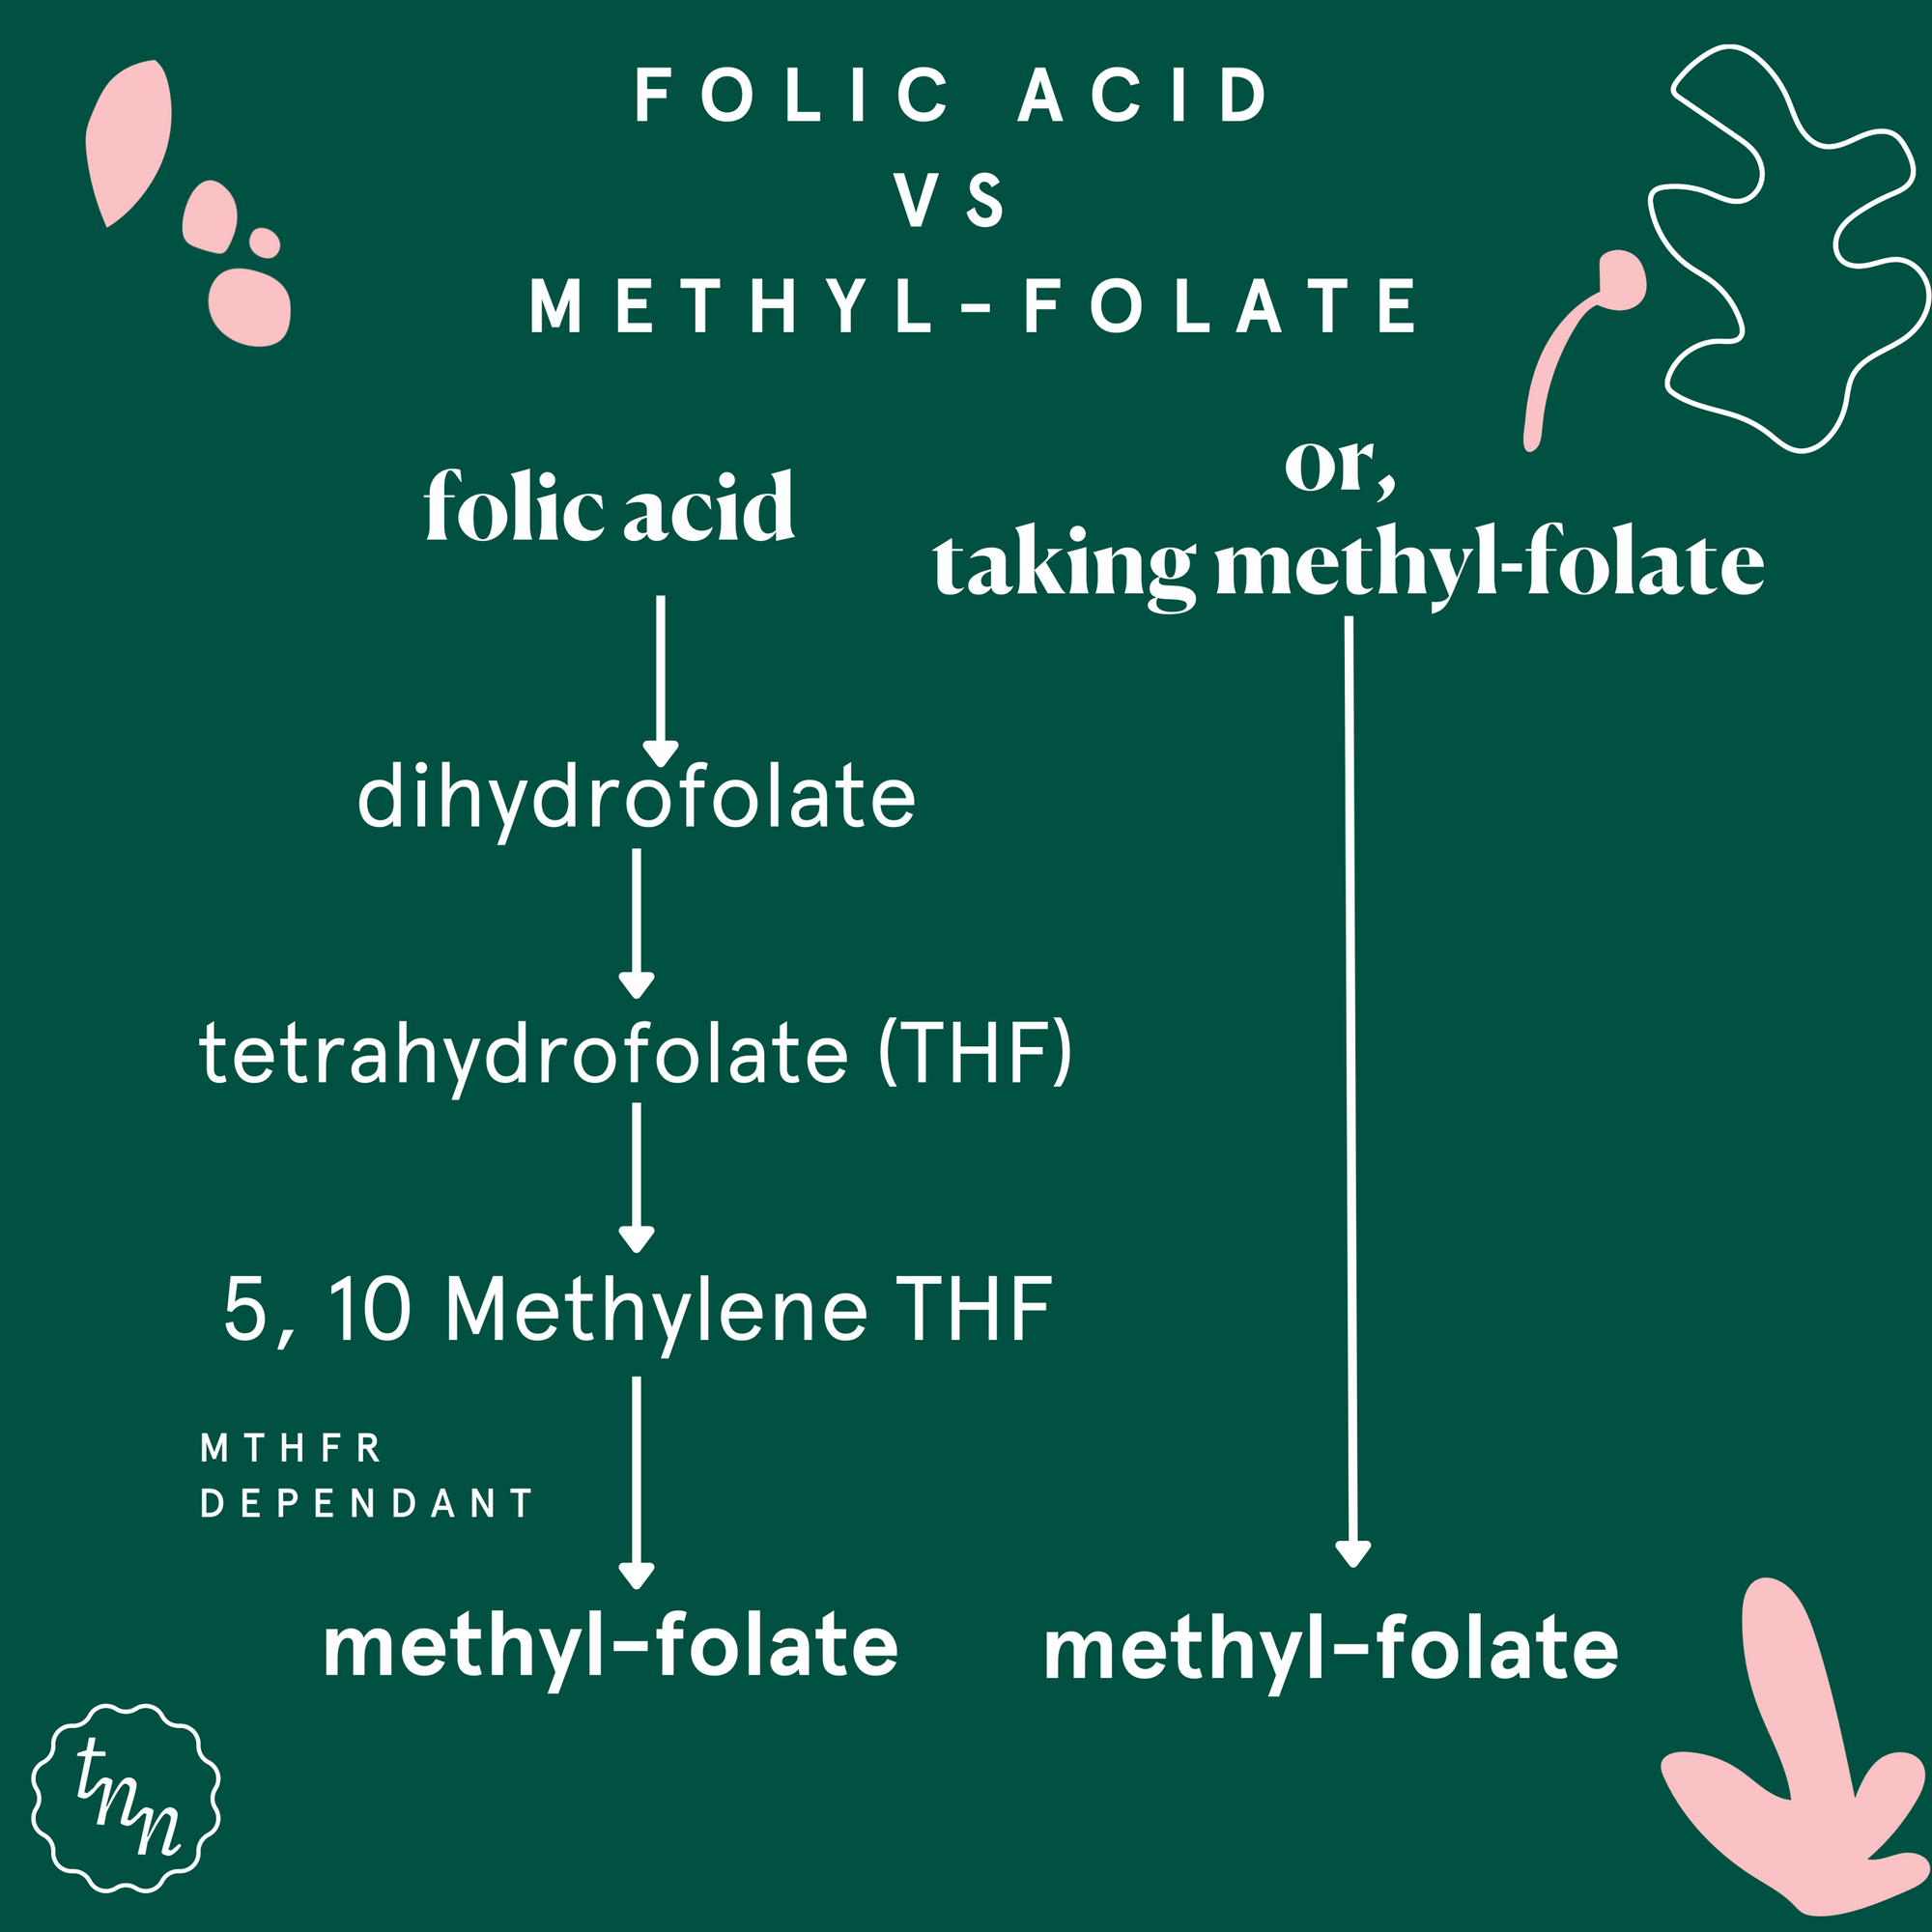 Folic Acid vs Methyl-Folate: why is one better than the other?